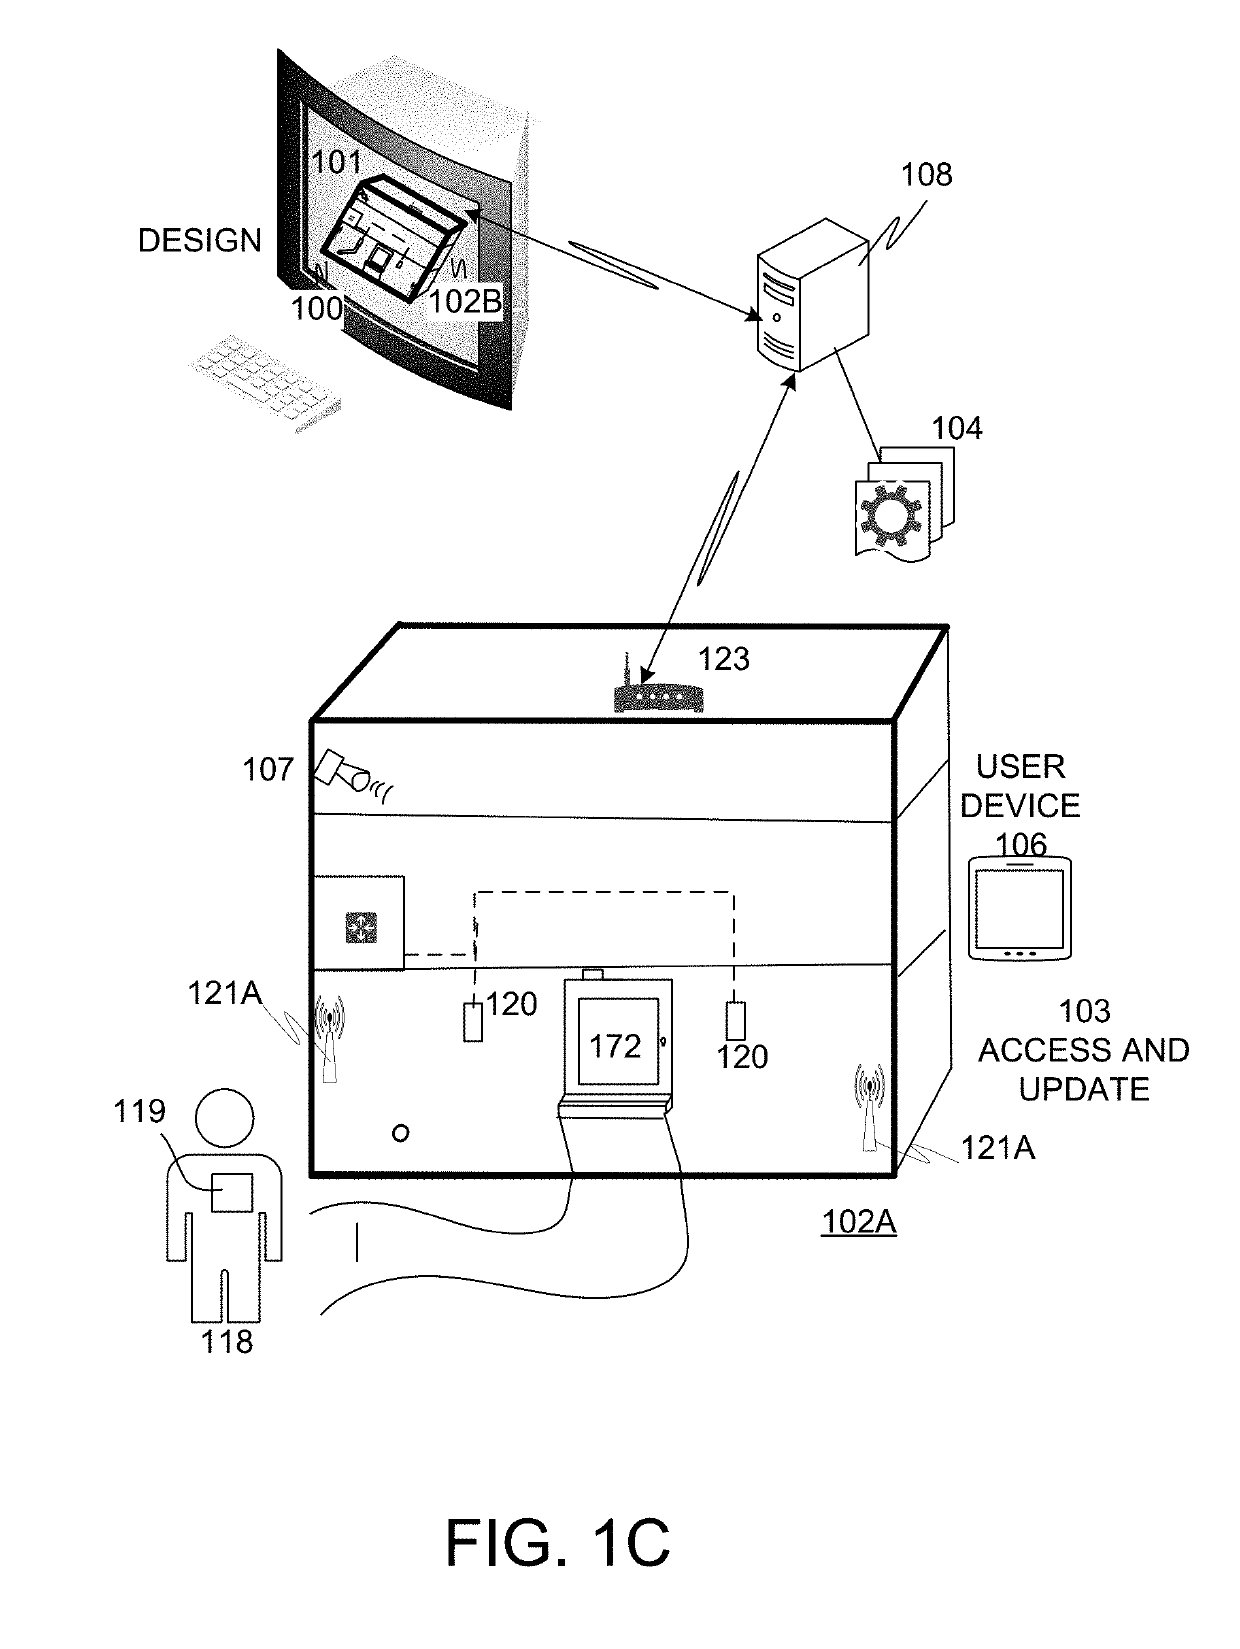 Orienteering system for responding to an emergency in a structure